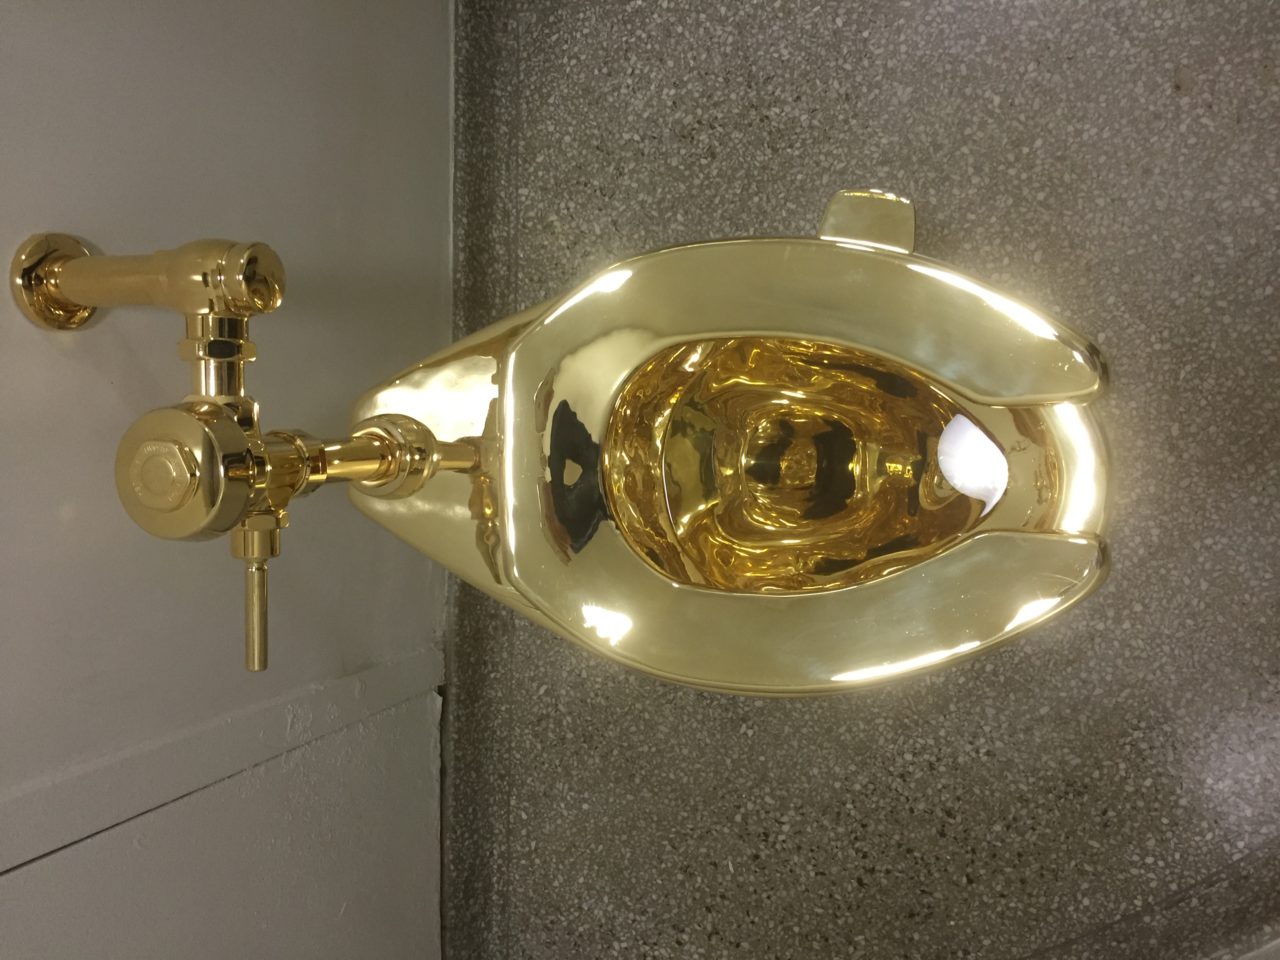 Louis Vuitton Gold Toilet Selling For $100,000 